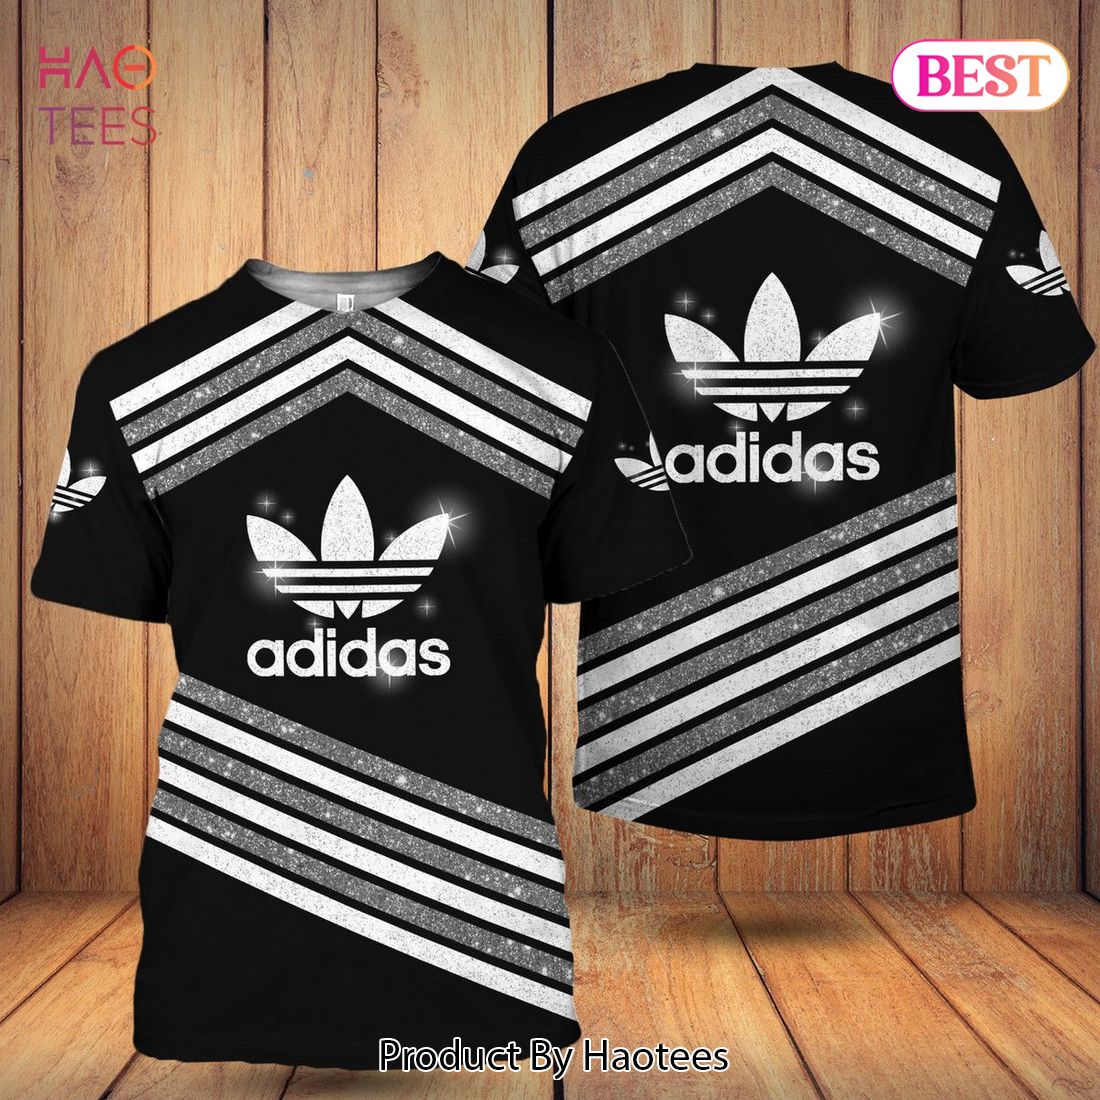 NEW Adidas 3D T-Shirt Stripe Pattern Twinkle Limited Edition